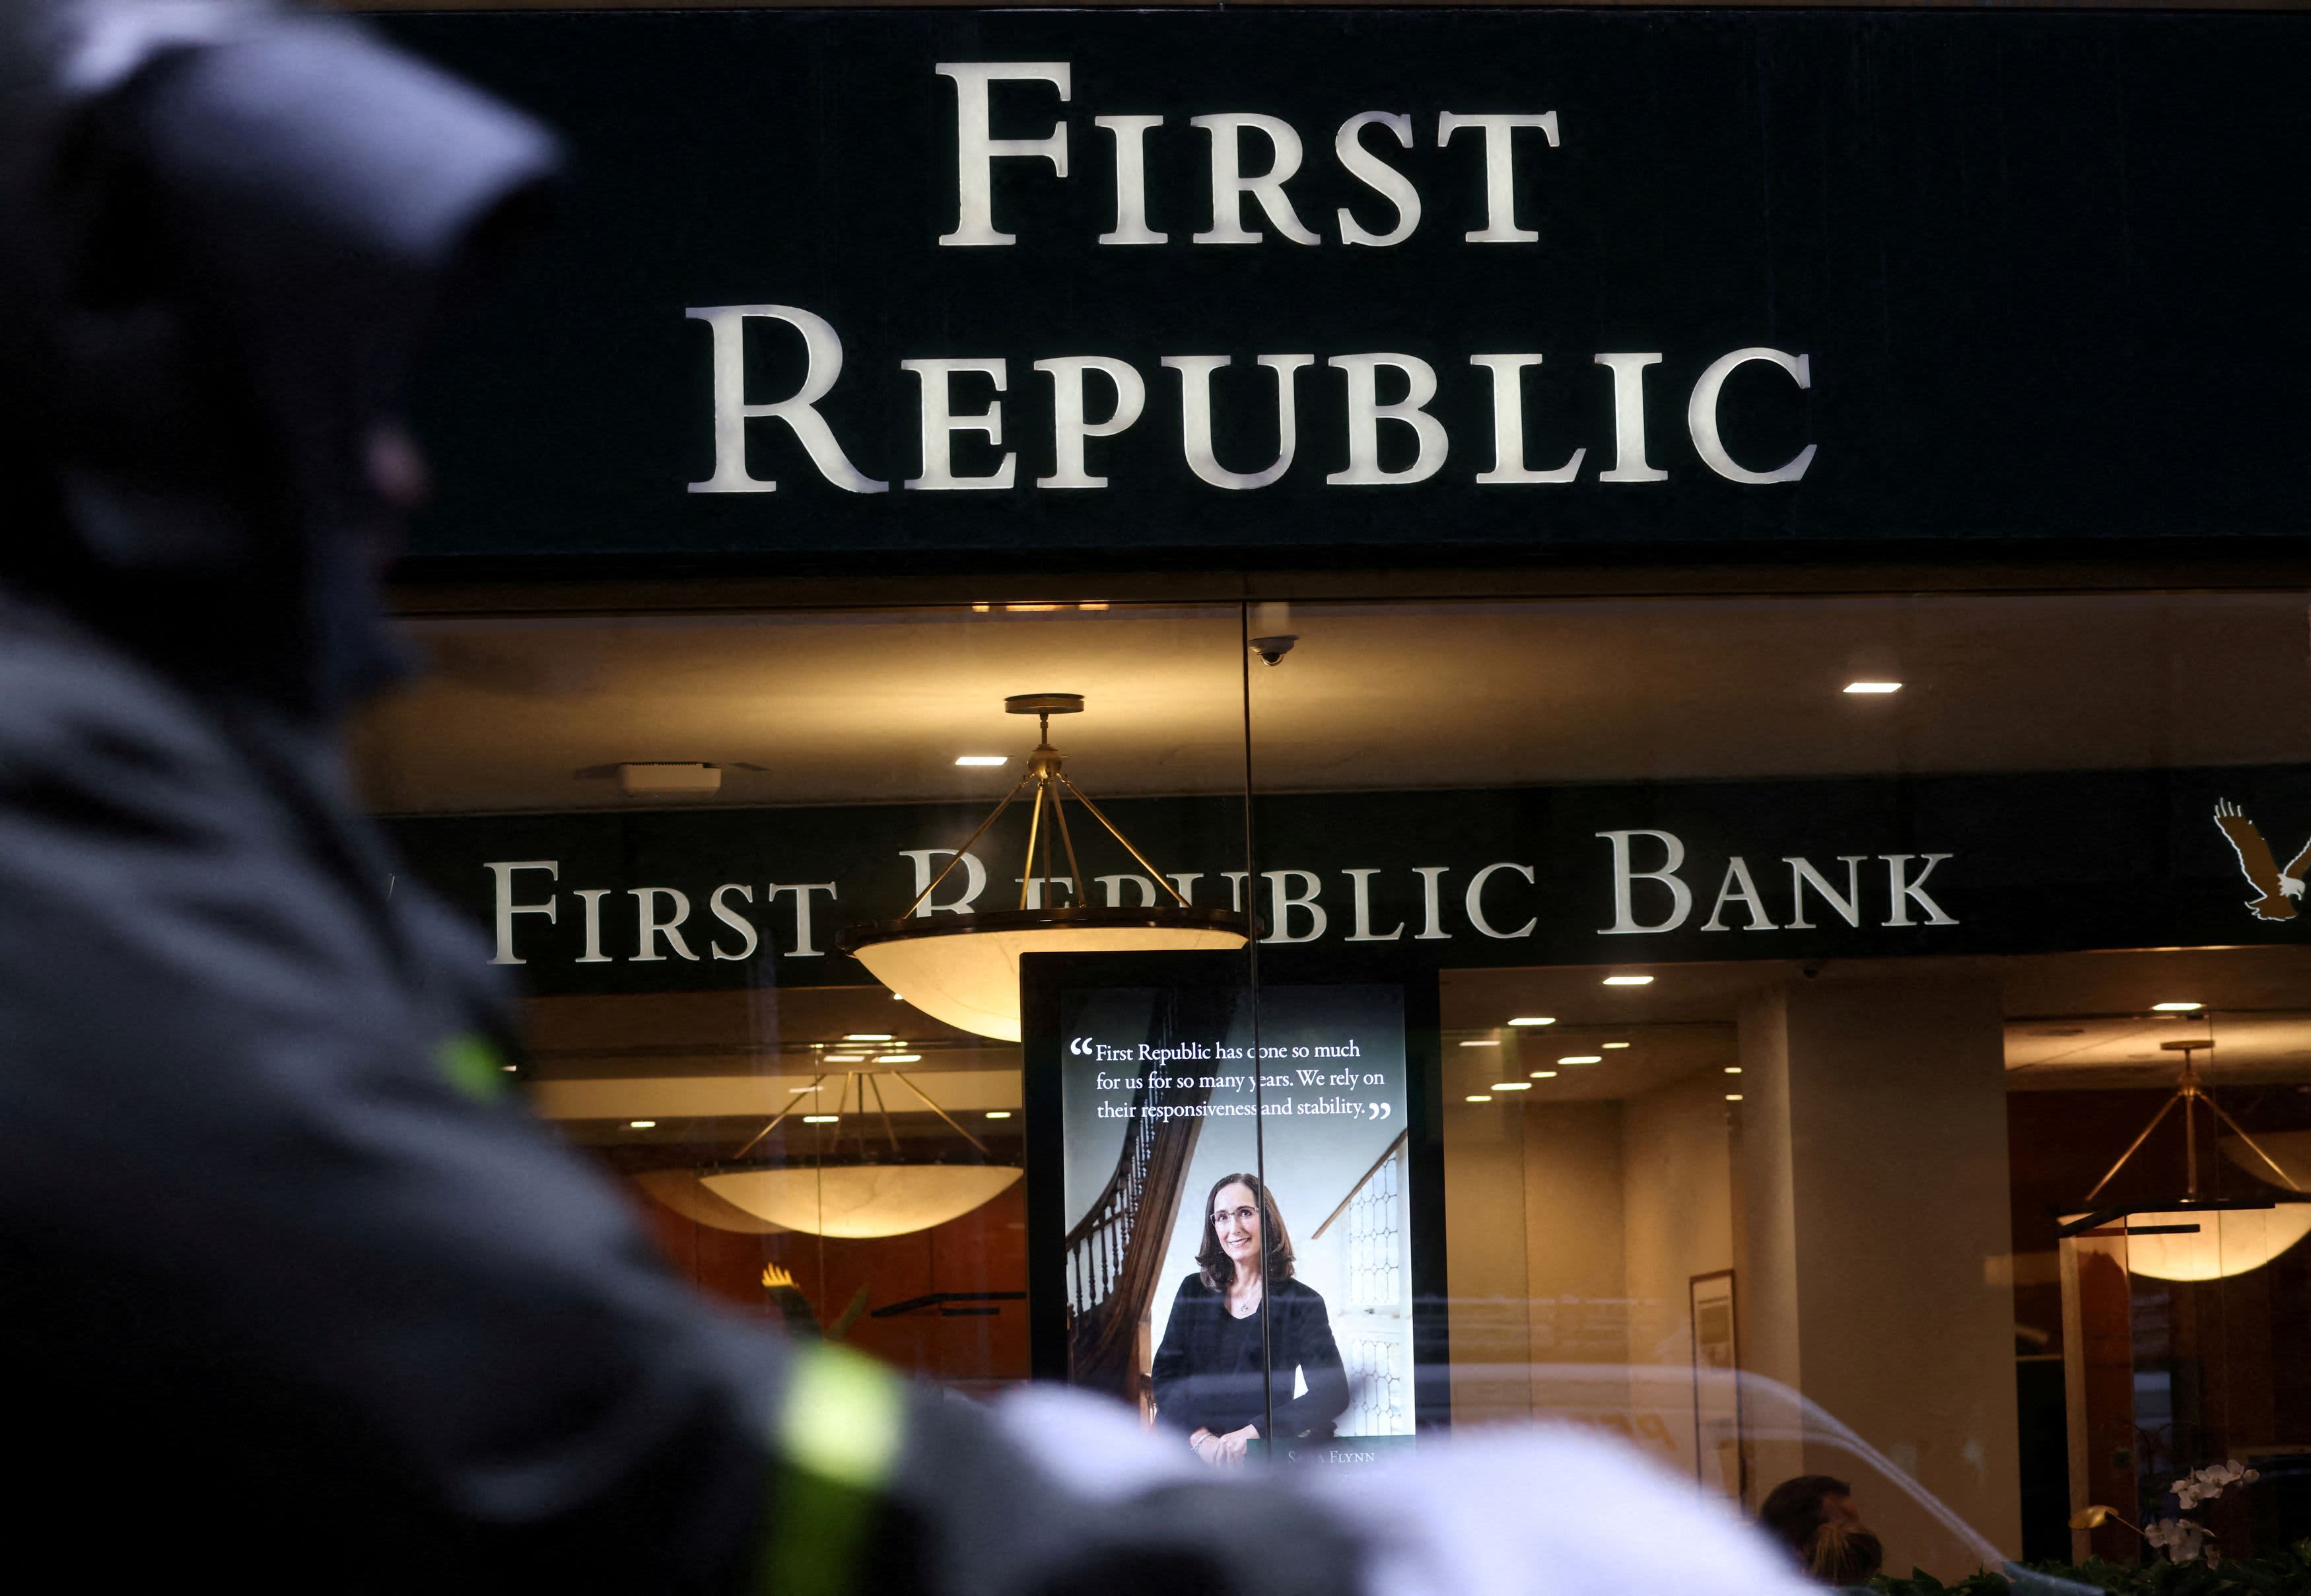 S&P says First Republic digs deeper into junk, says $30 billion infusion may not solve problems